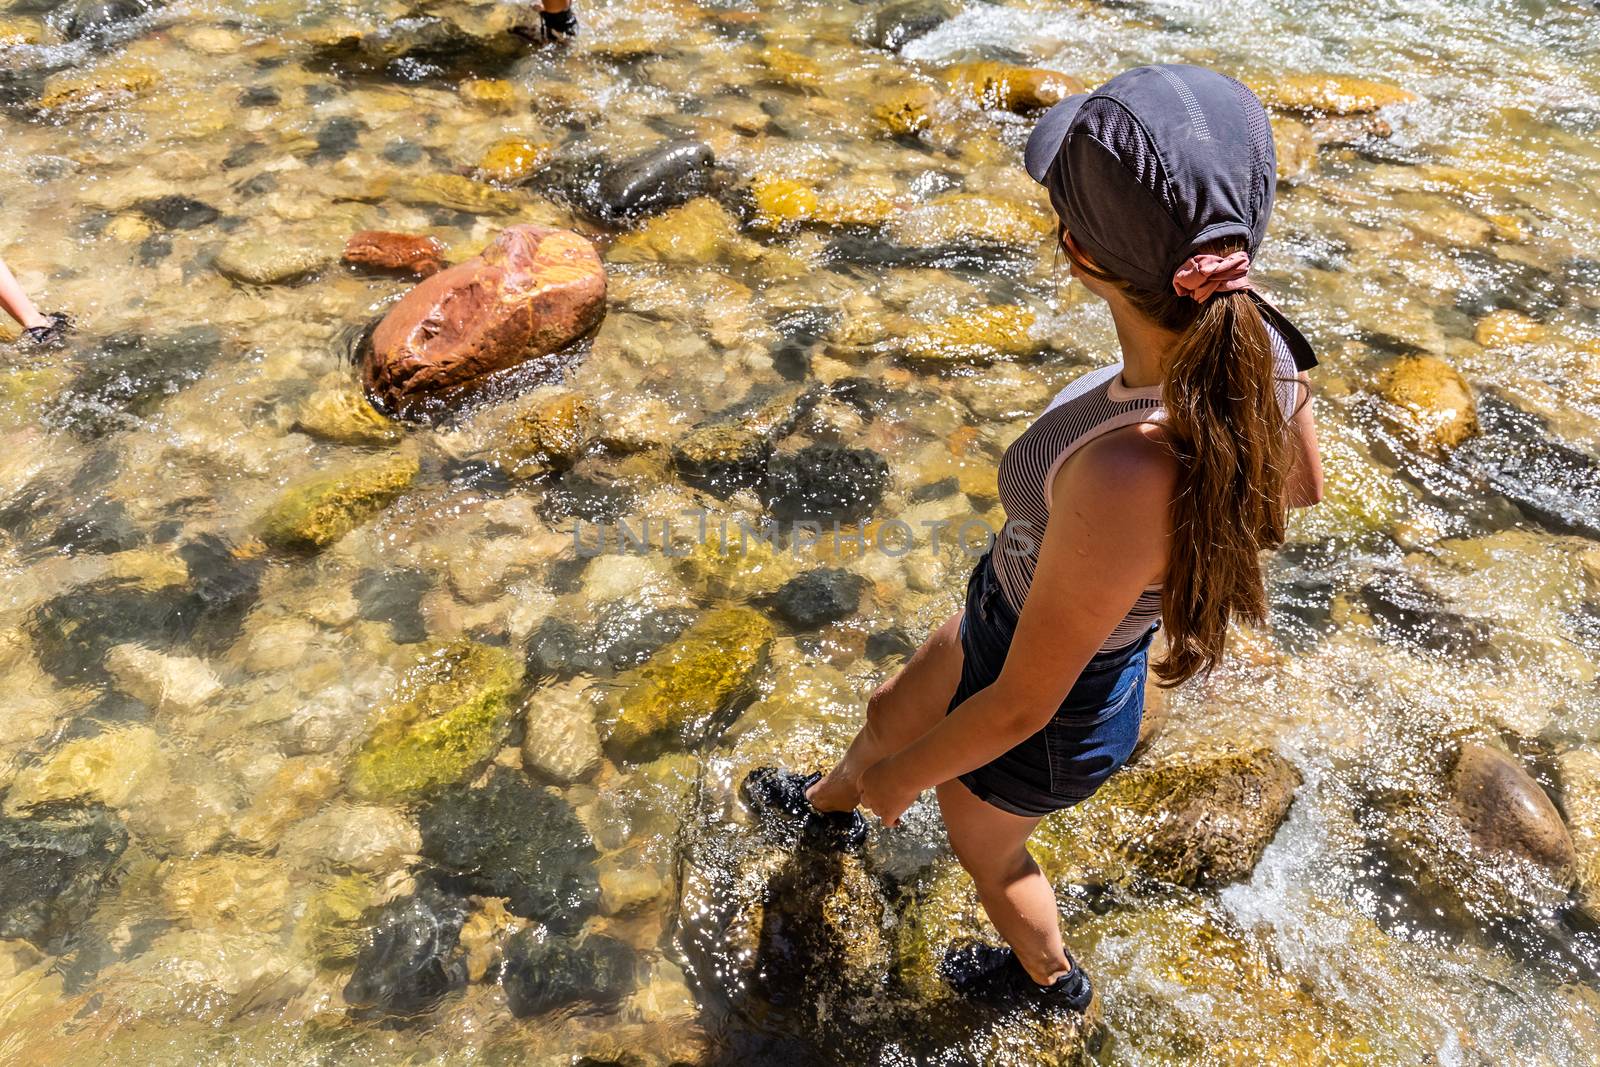 Teenage girl wading in the river, feet wet in Zion National Park, Utah, USA